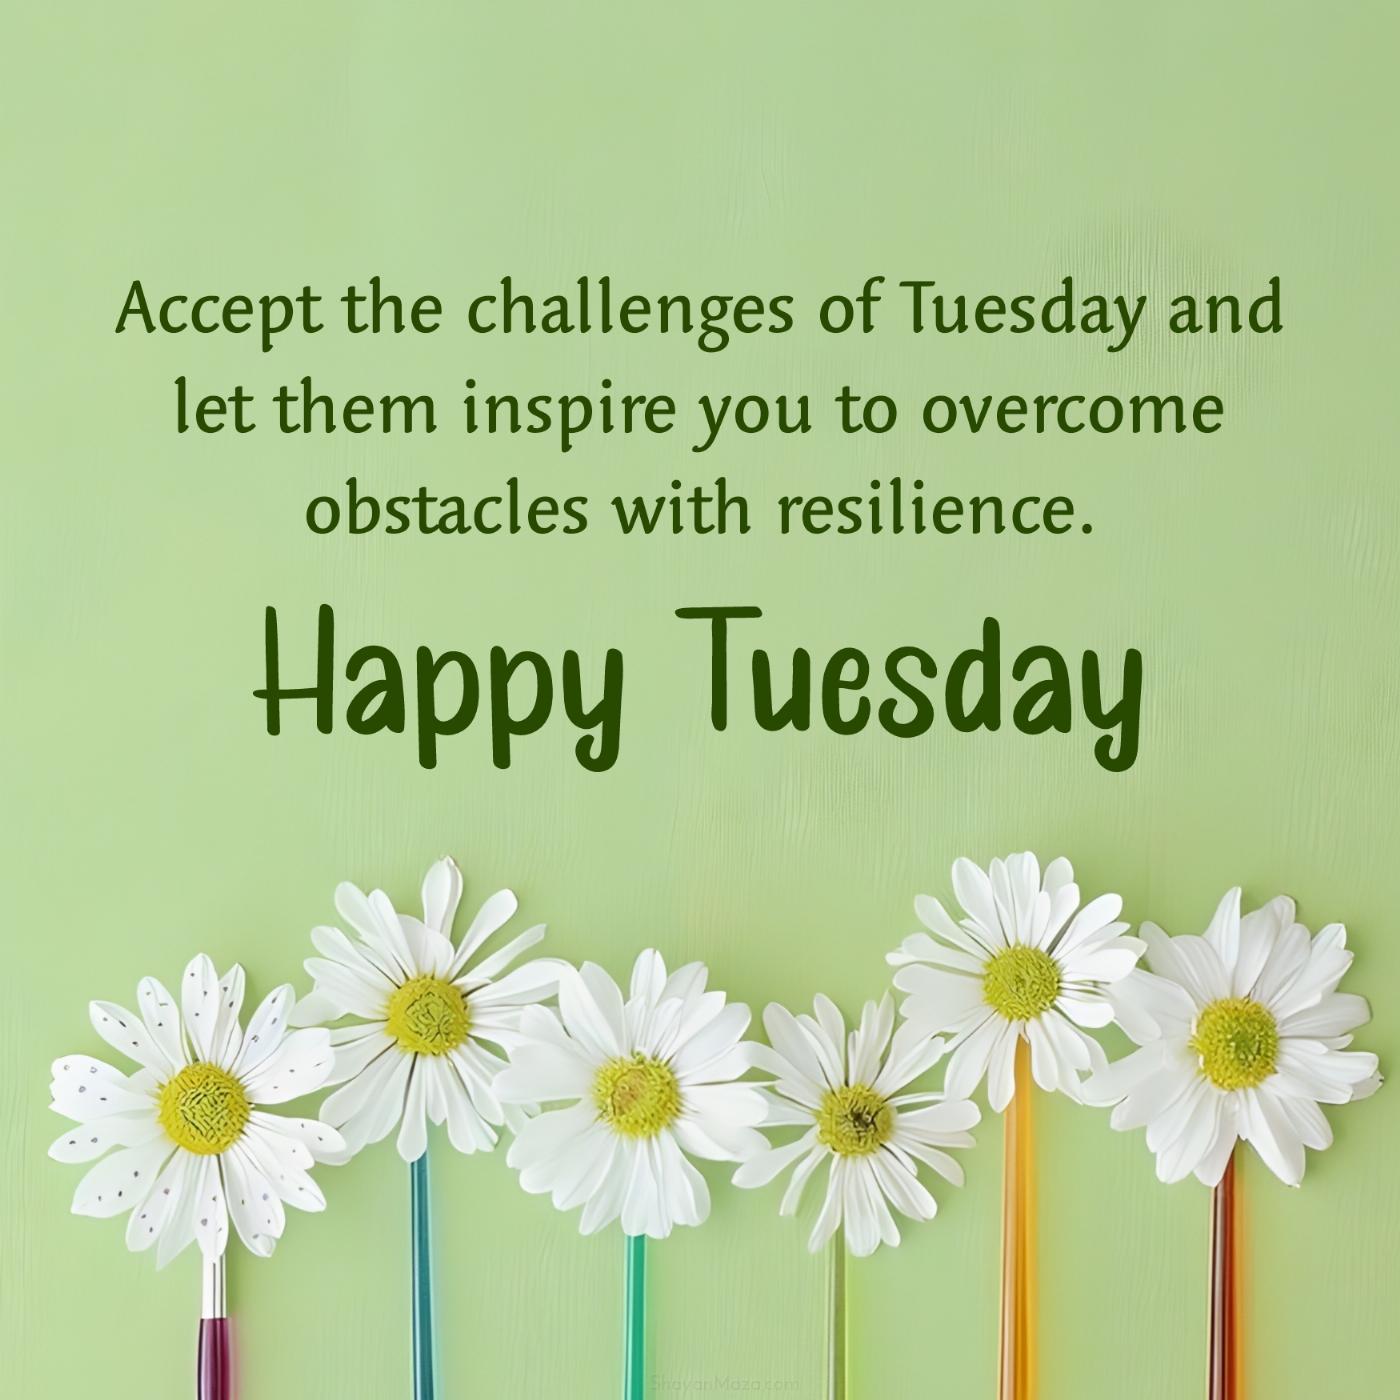 Accept the challenges of Tuesday and let them inspire you